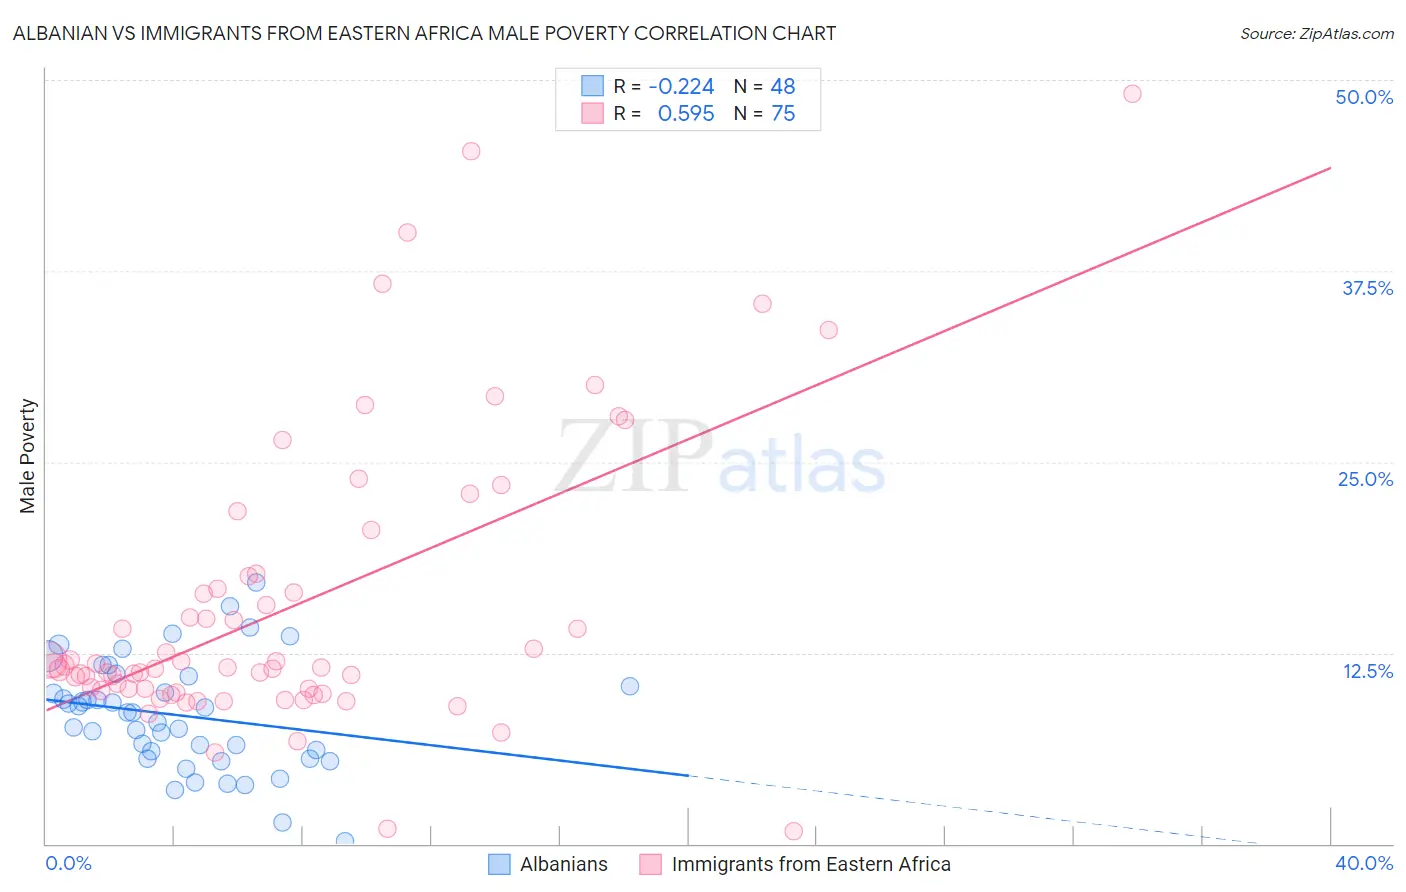 Albanian vs Immigrants from Eastern Africa Male Poverty